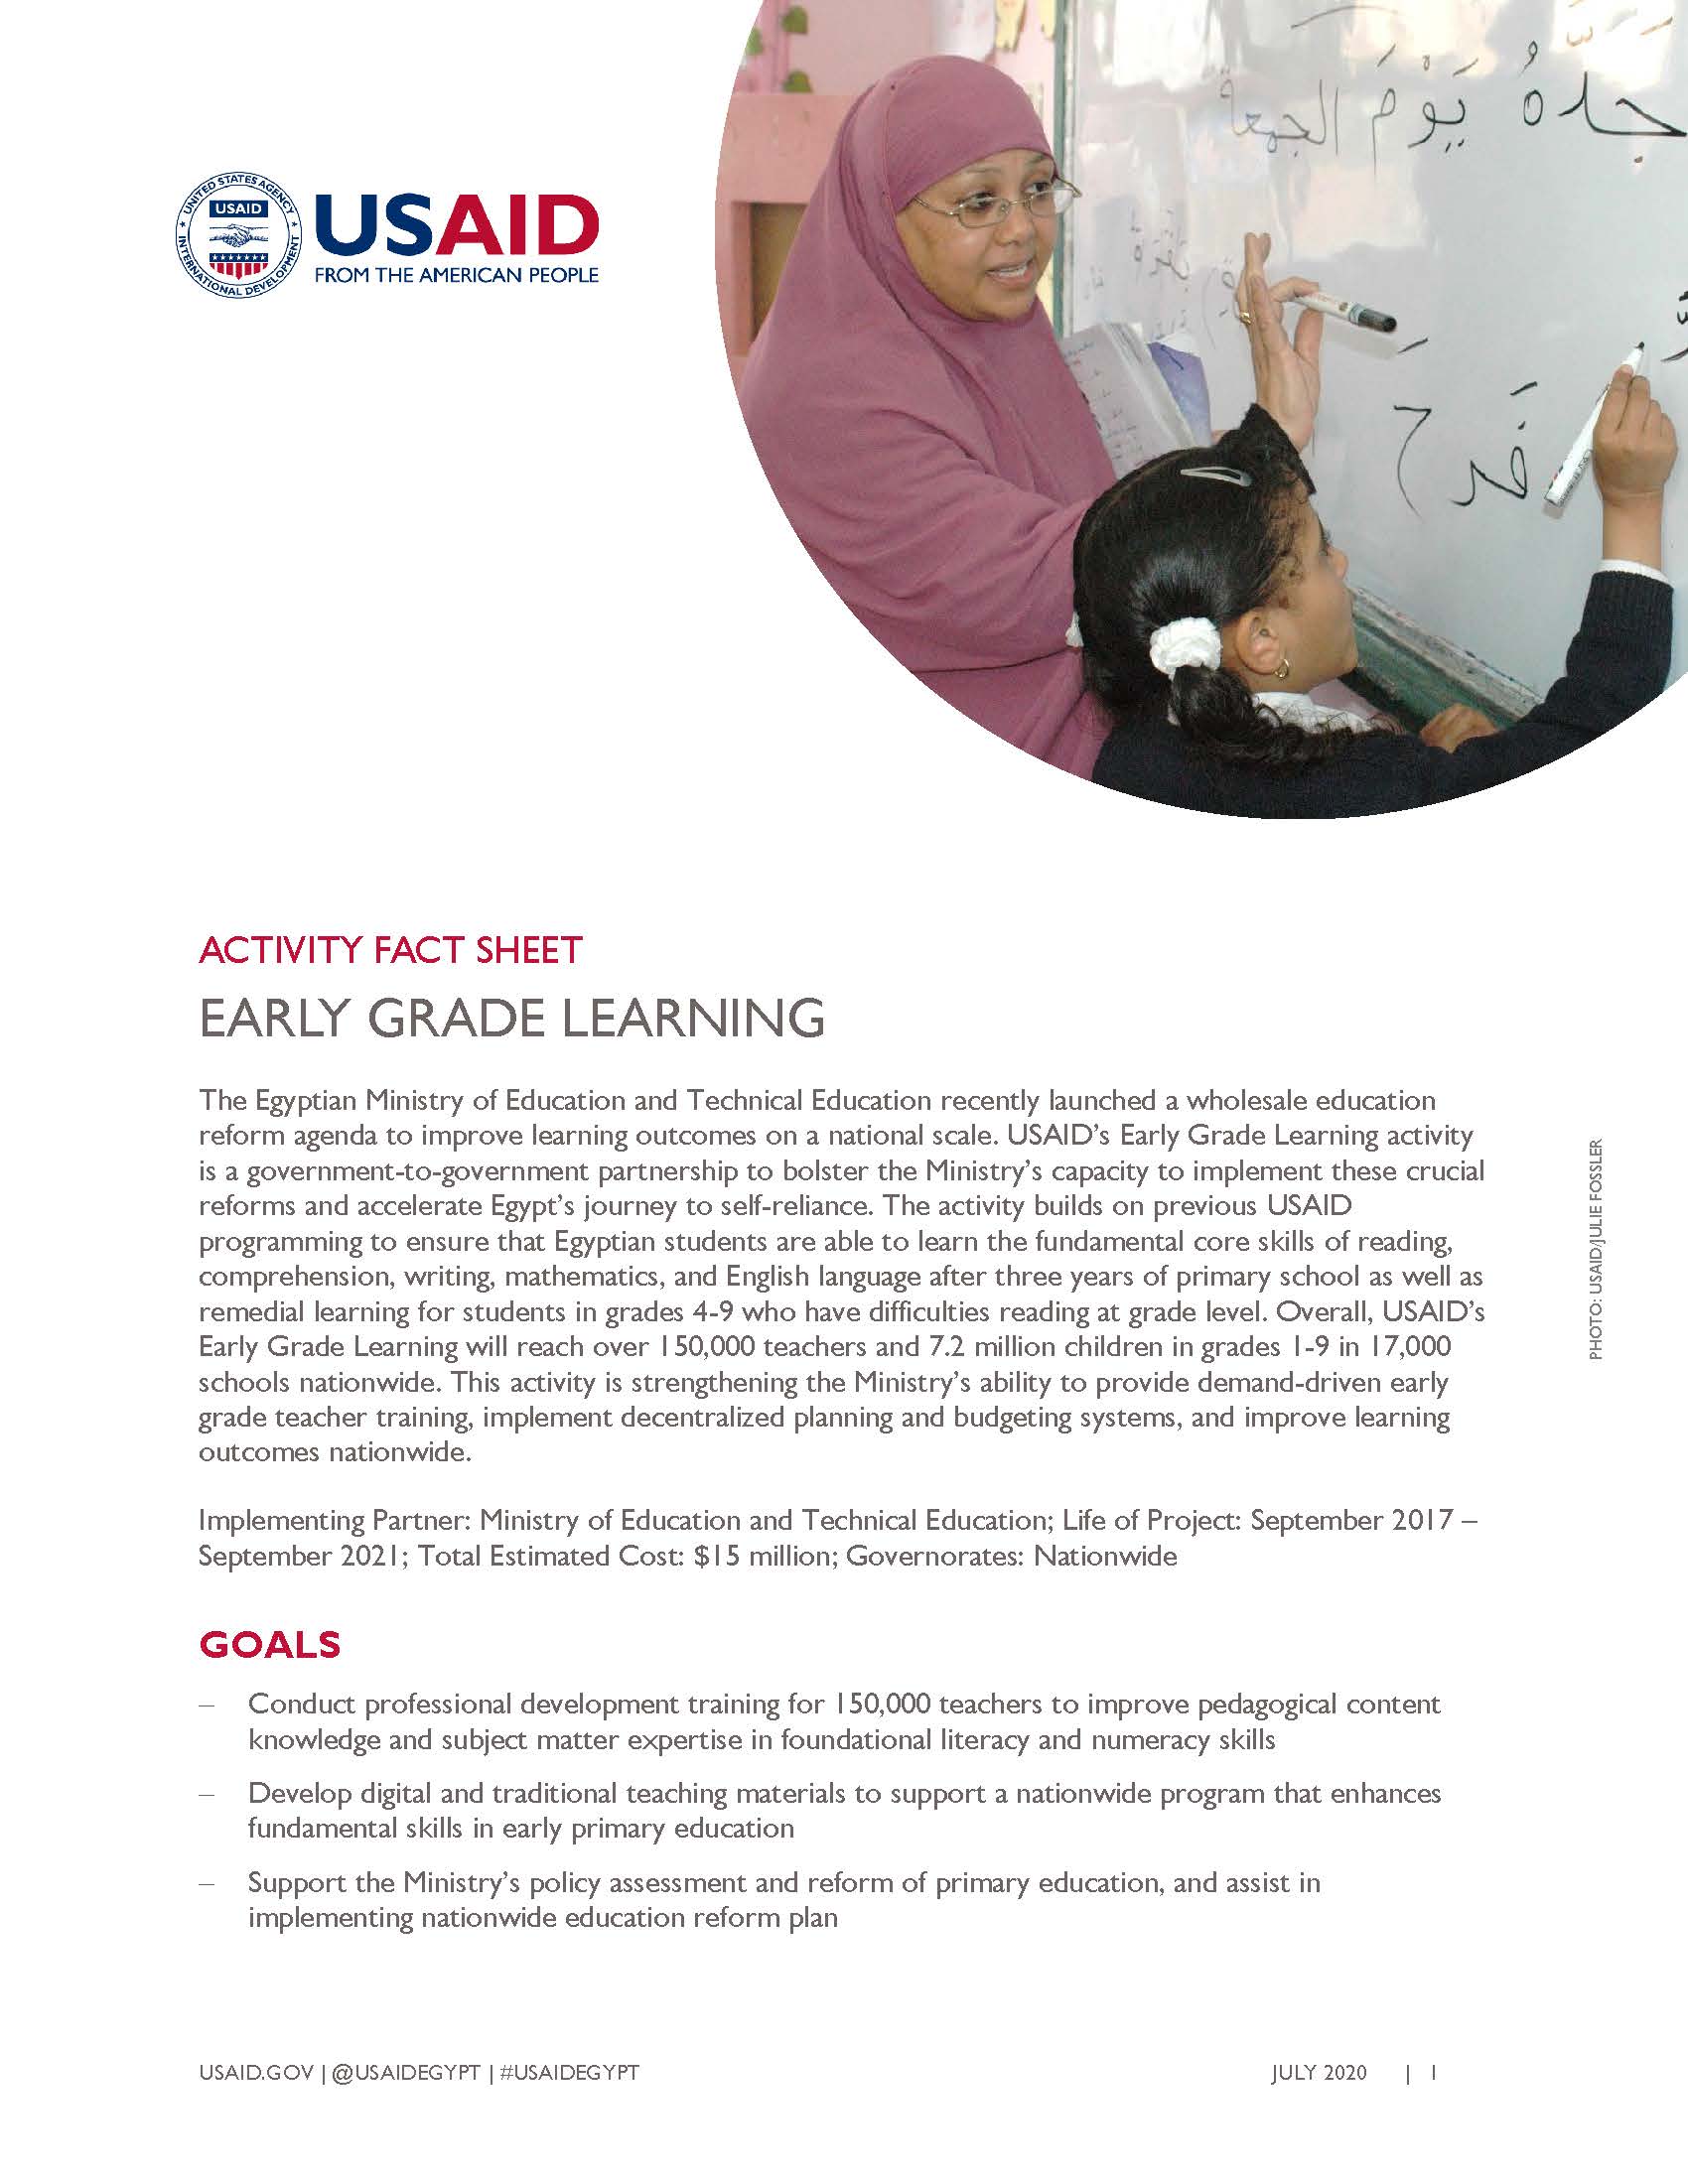 USAID/Egypt Activity Fact Sheet: Early Grade Learning